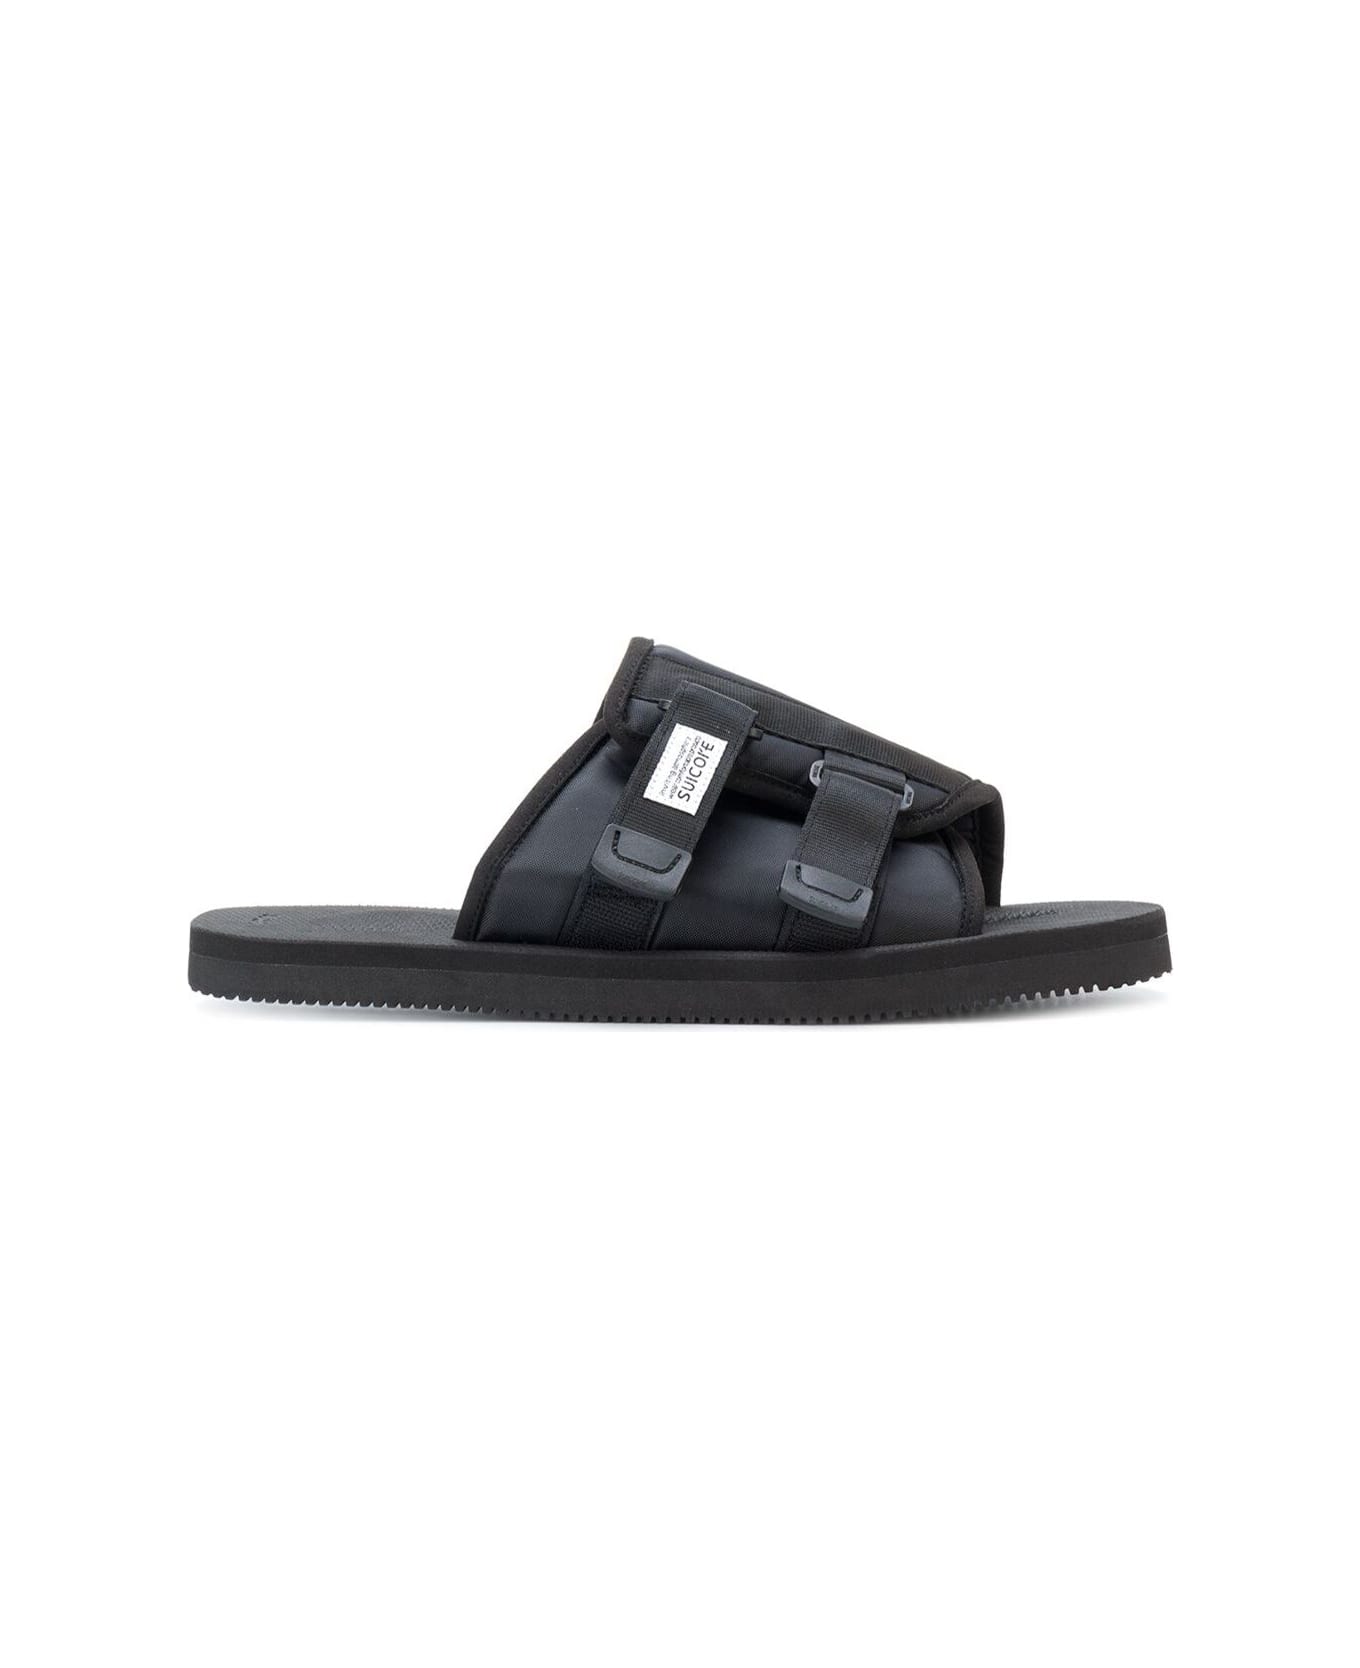 SUICOKE 'kaw-cab' Black Sandals With Velcro Fastening In Nylon Man Suicoke - Black その他各種シューズ